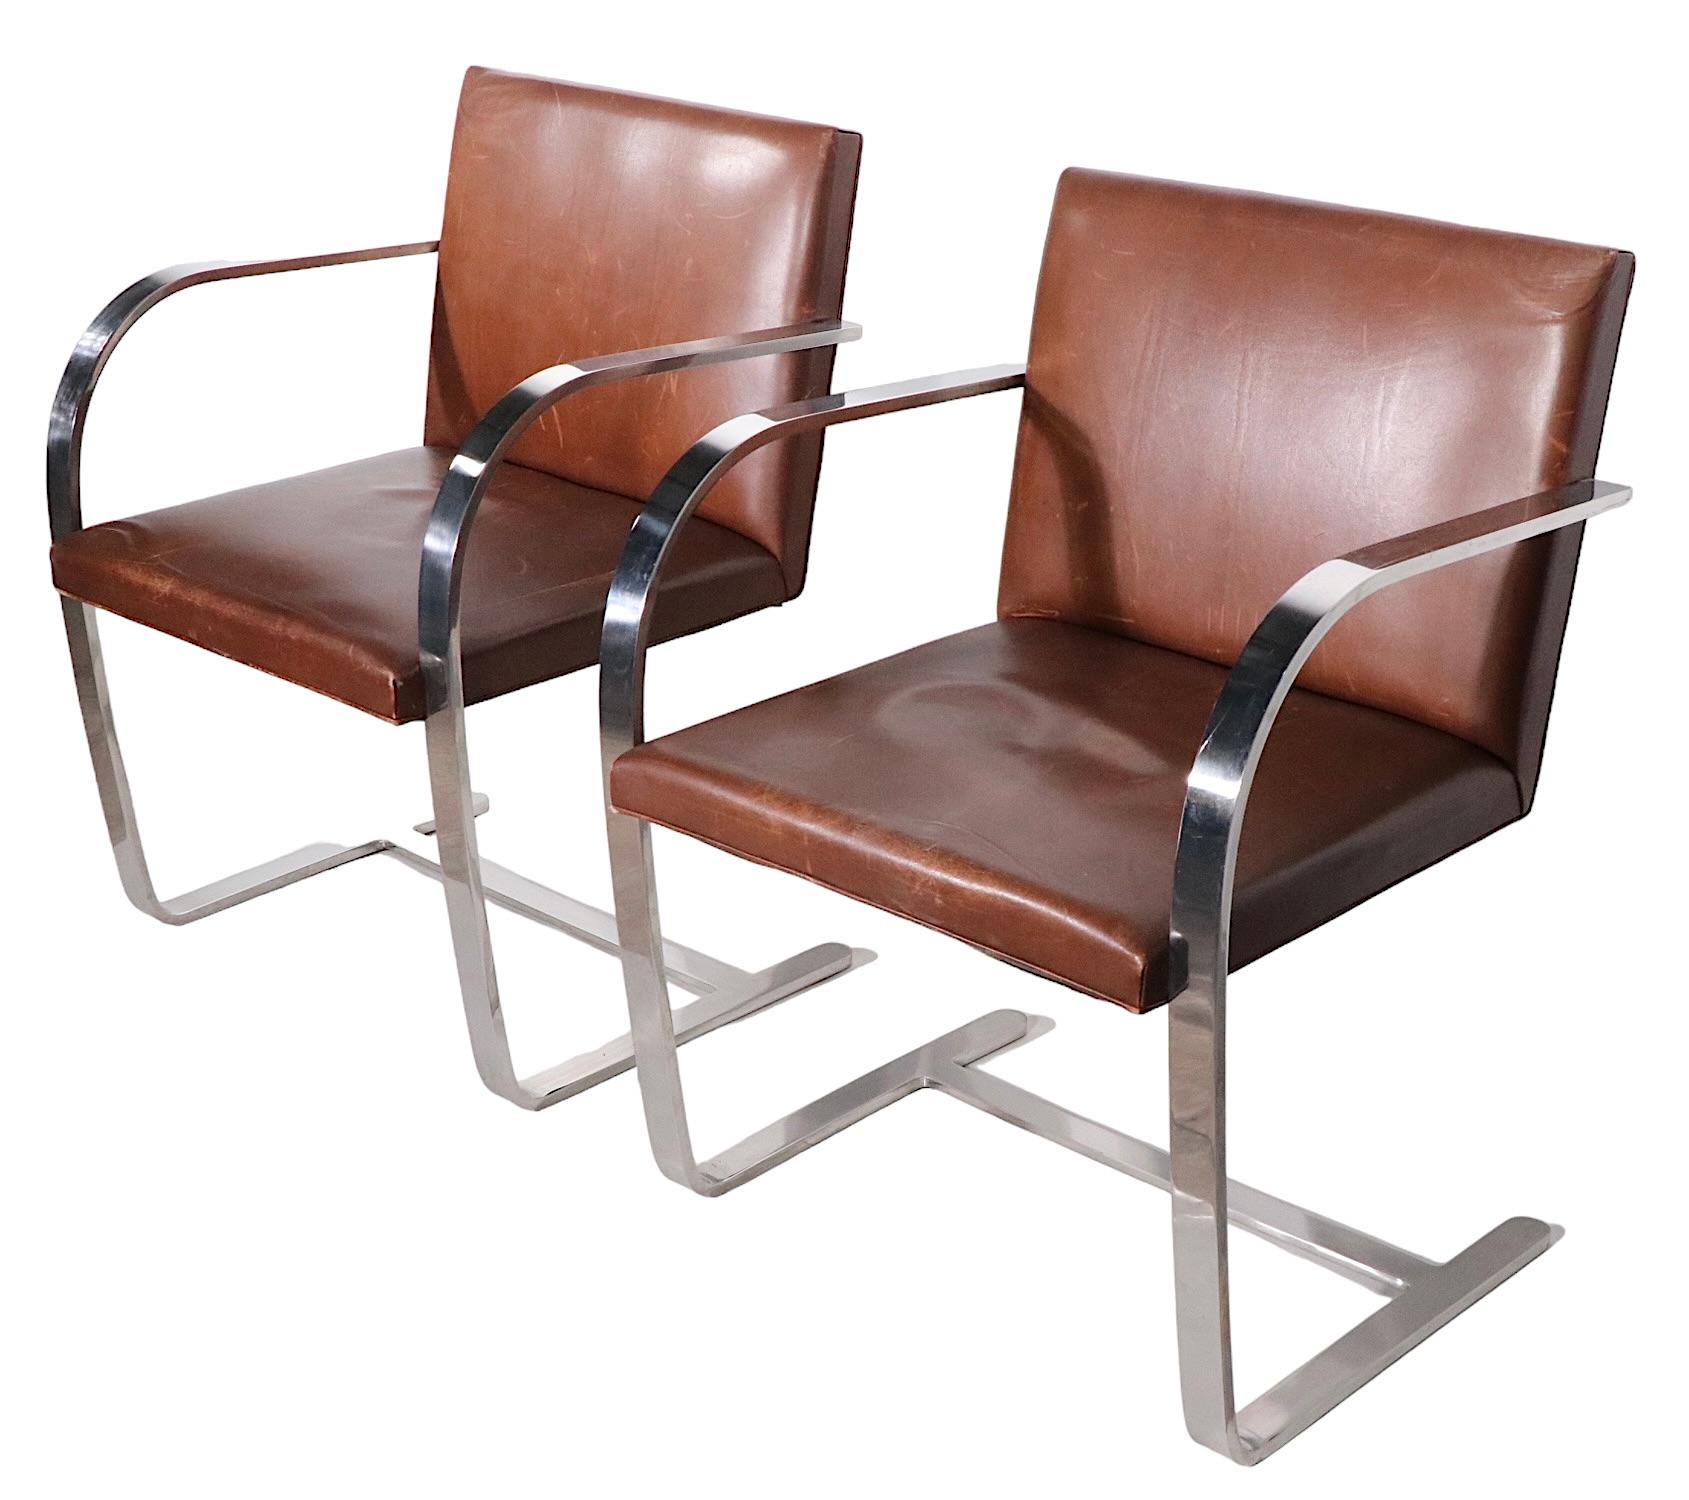 Pr. Meis Van Der Rohe Designed Brno Chairs by Knoll in Brown Leather 5